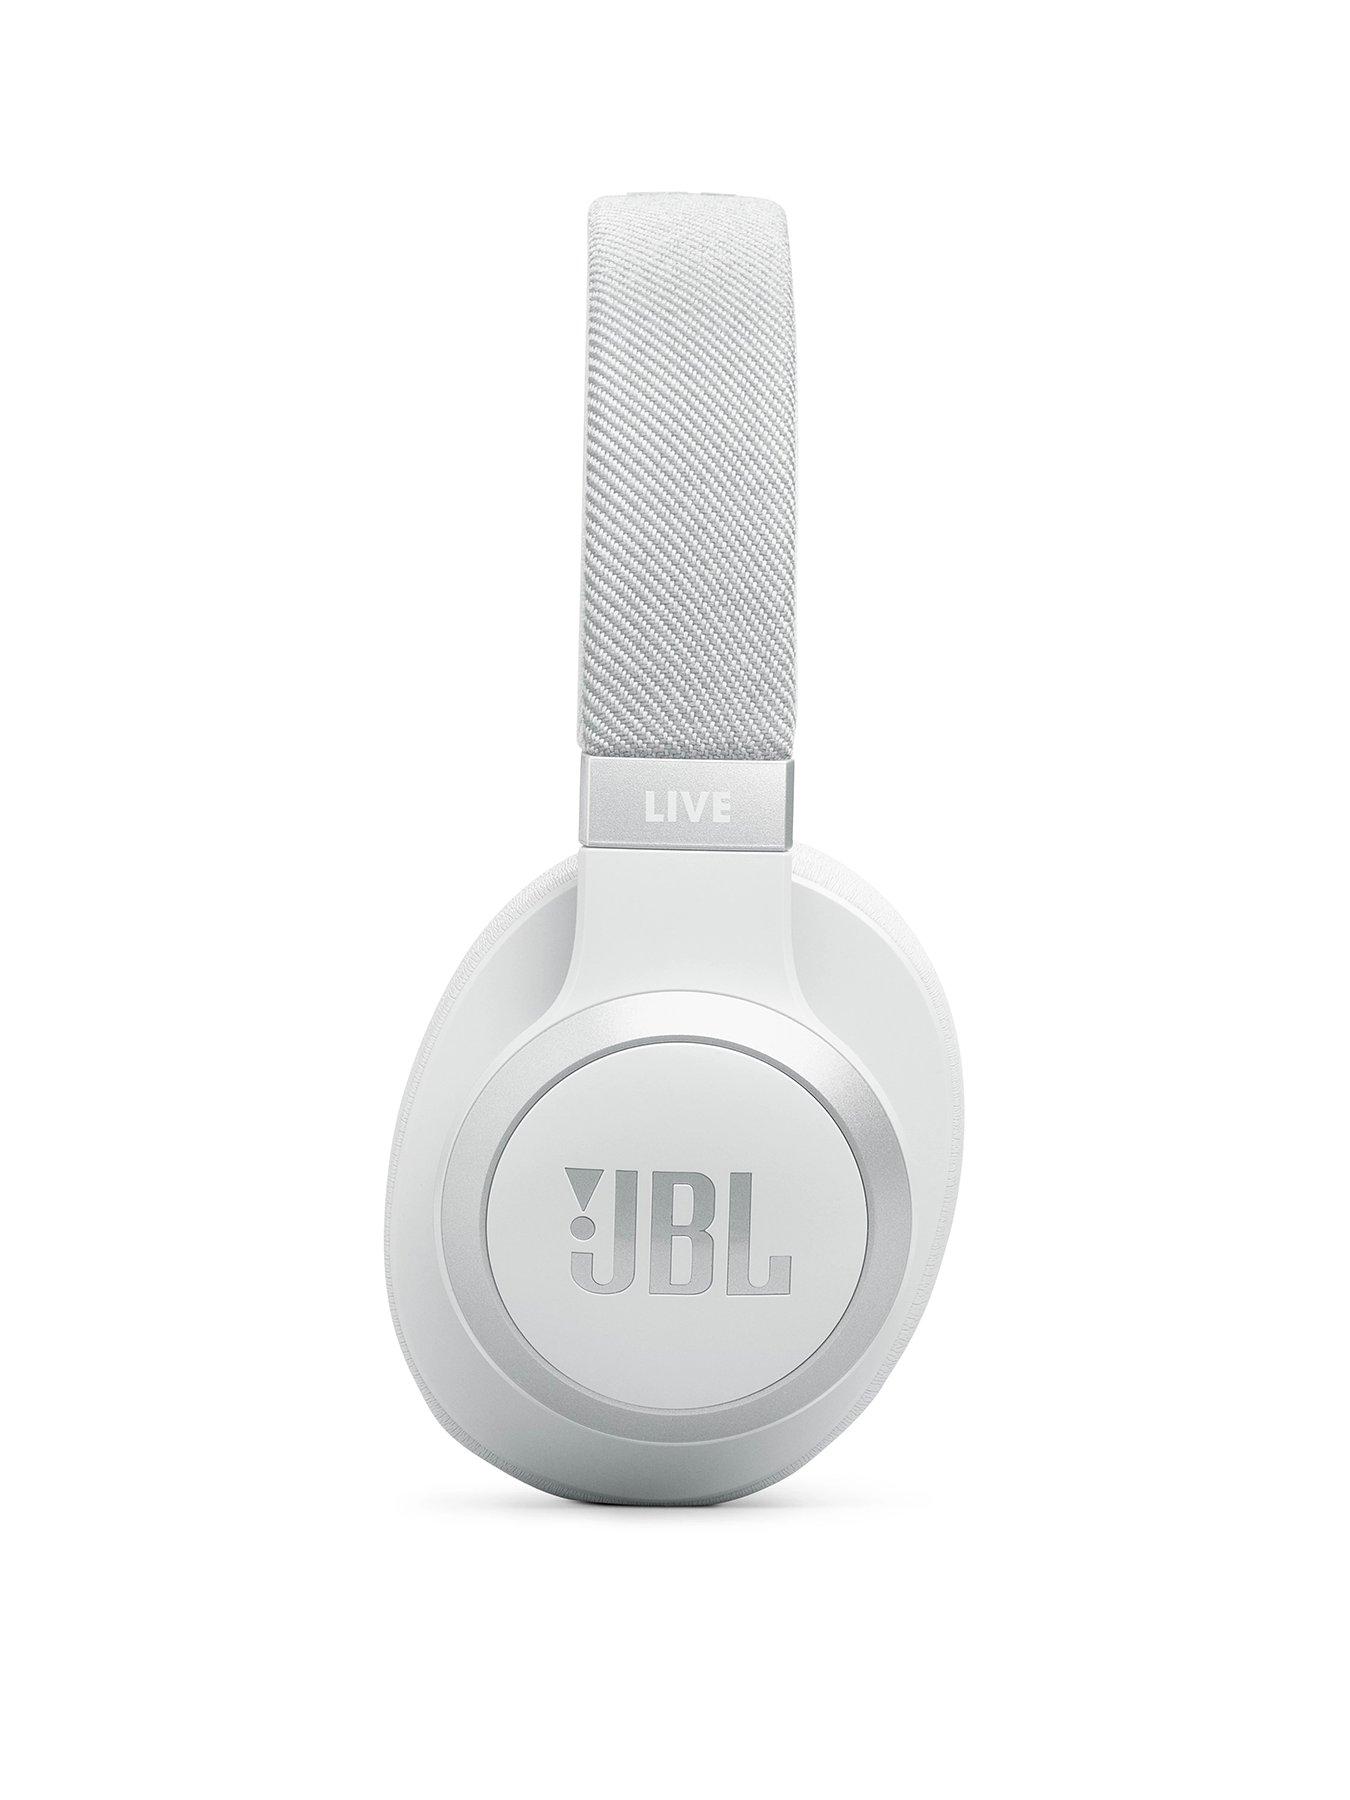 JBL Live 770NC Over-Ear Wireless Noise Cancelling Headphone